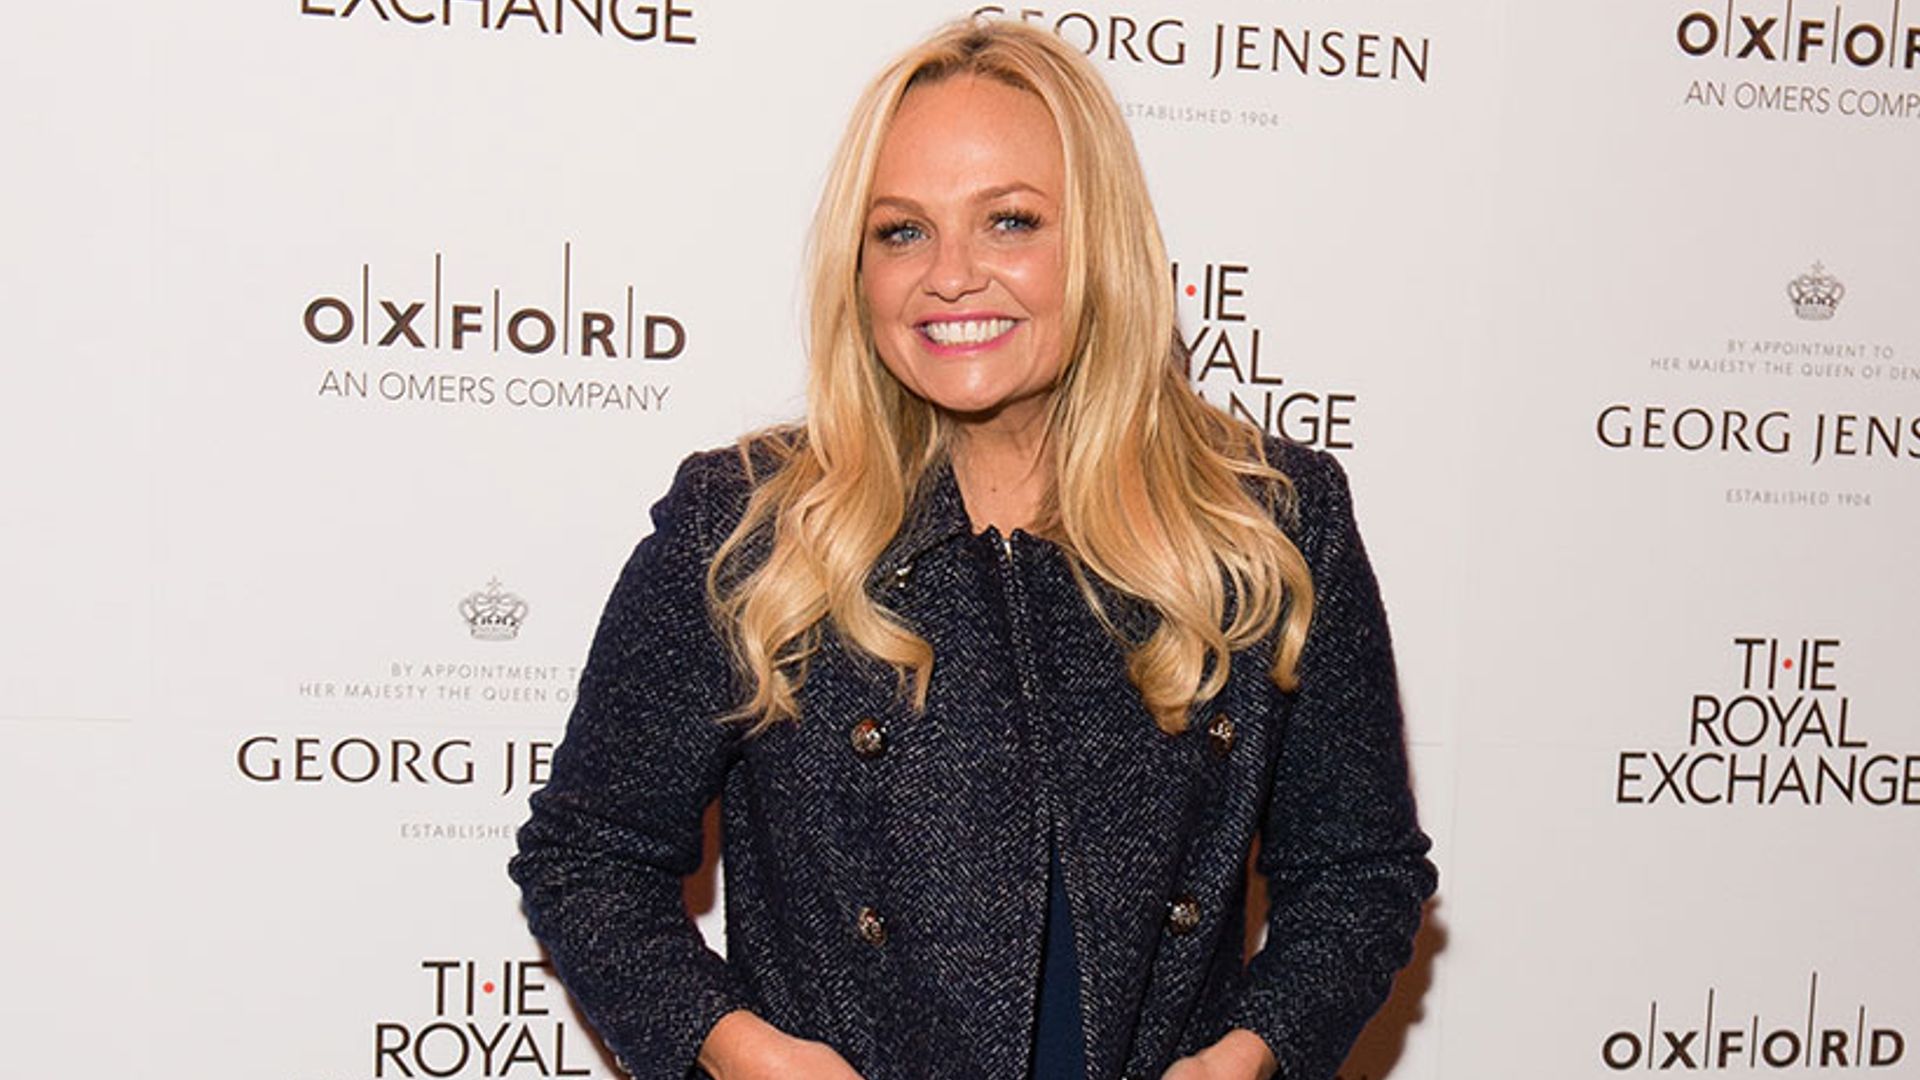 Fans praise Emma Bunton's incredible skin as she poses for a selfie with Robbie Williams